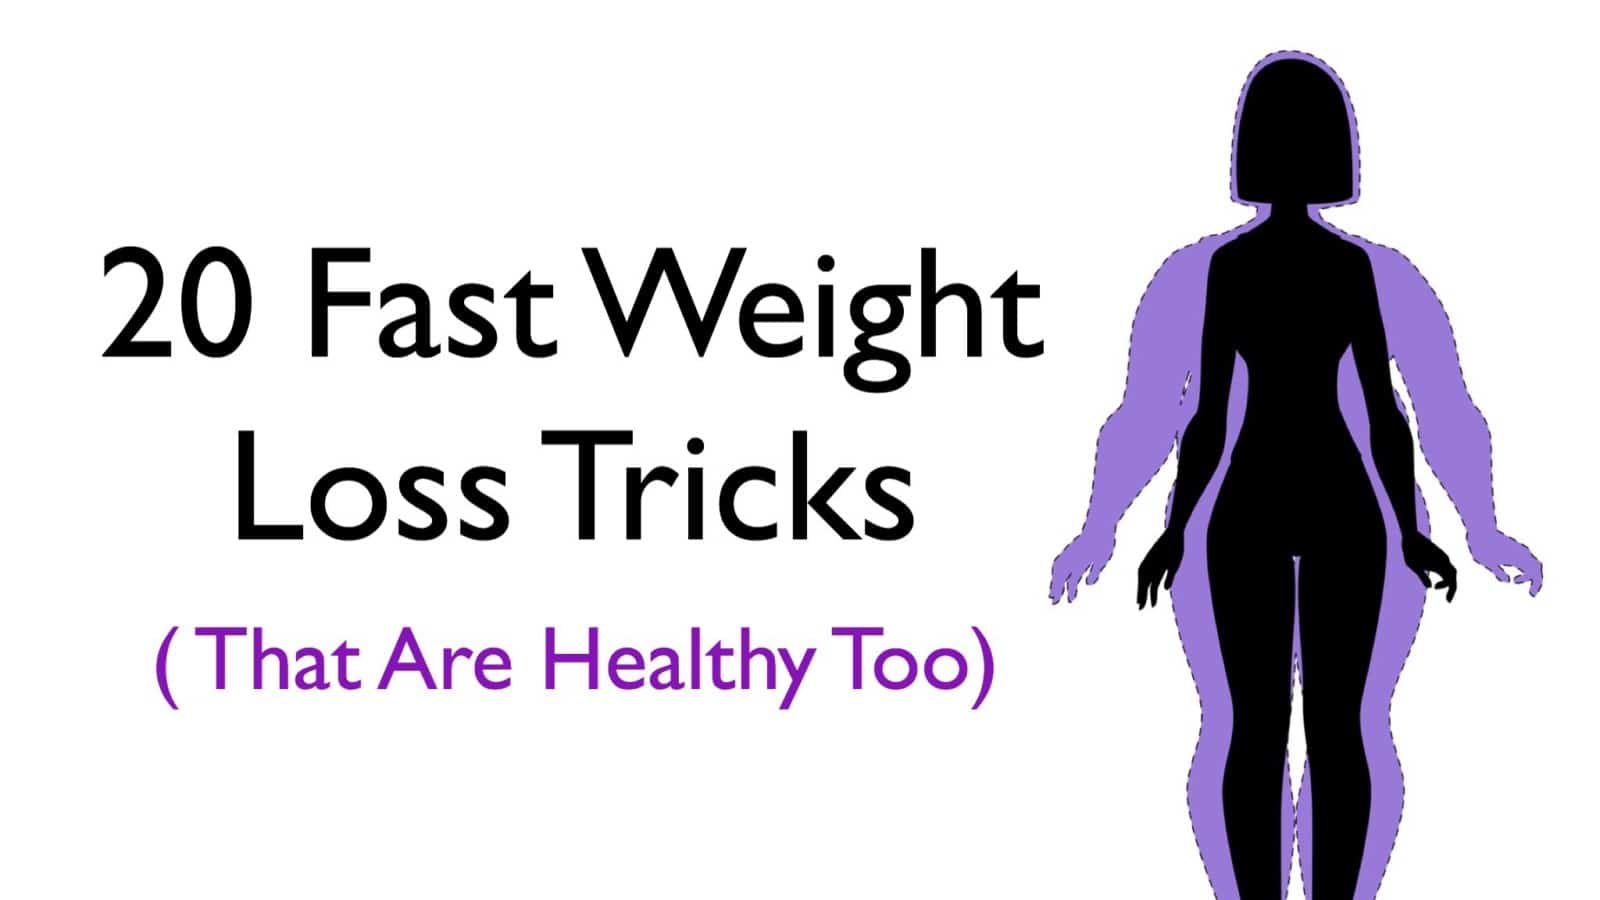 20 Fast Weight Loss Tricks (That Are Healthy)